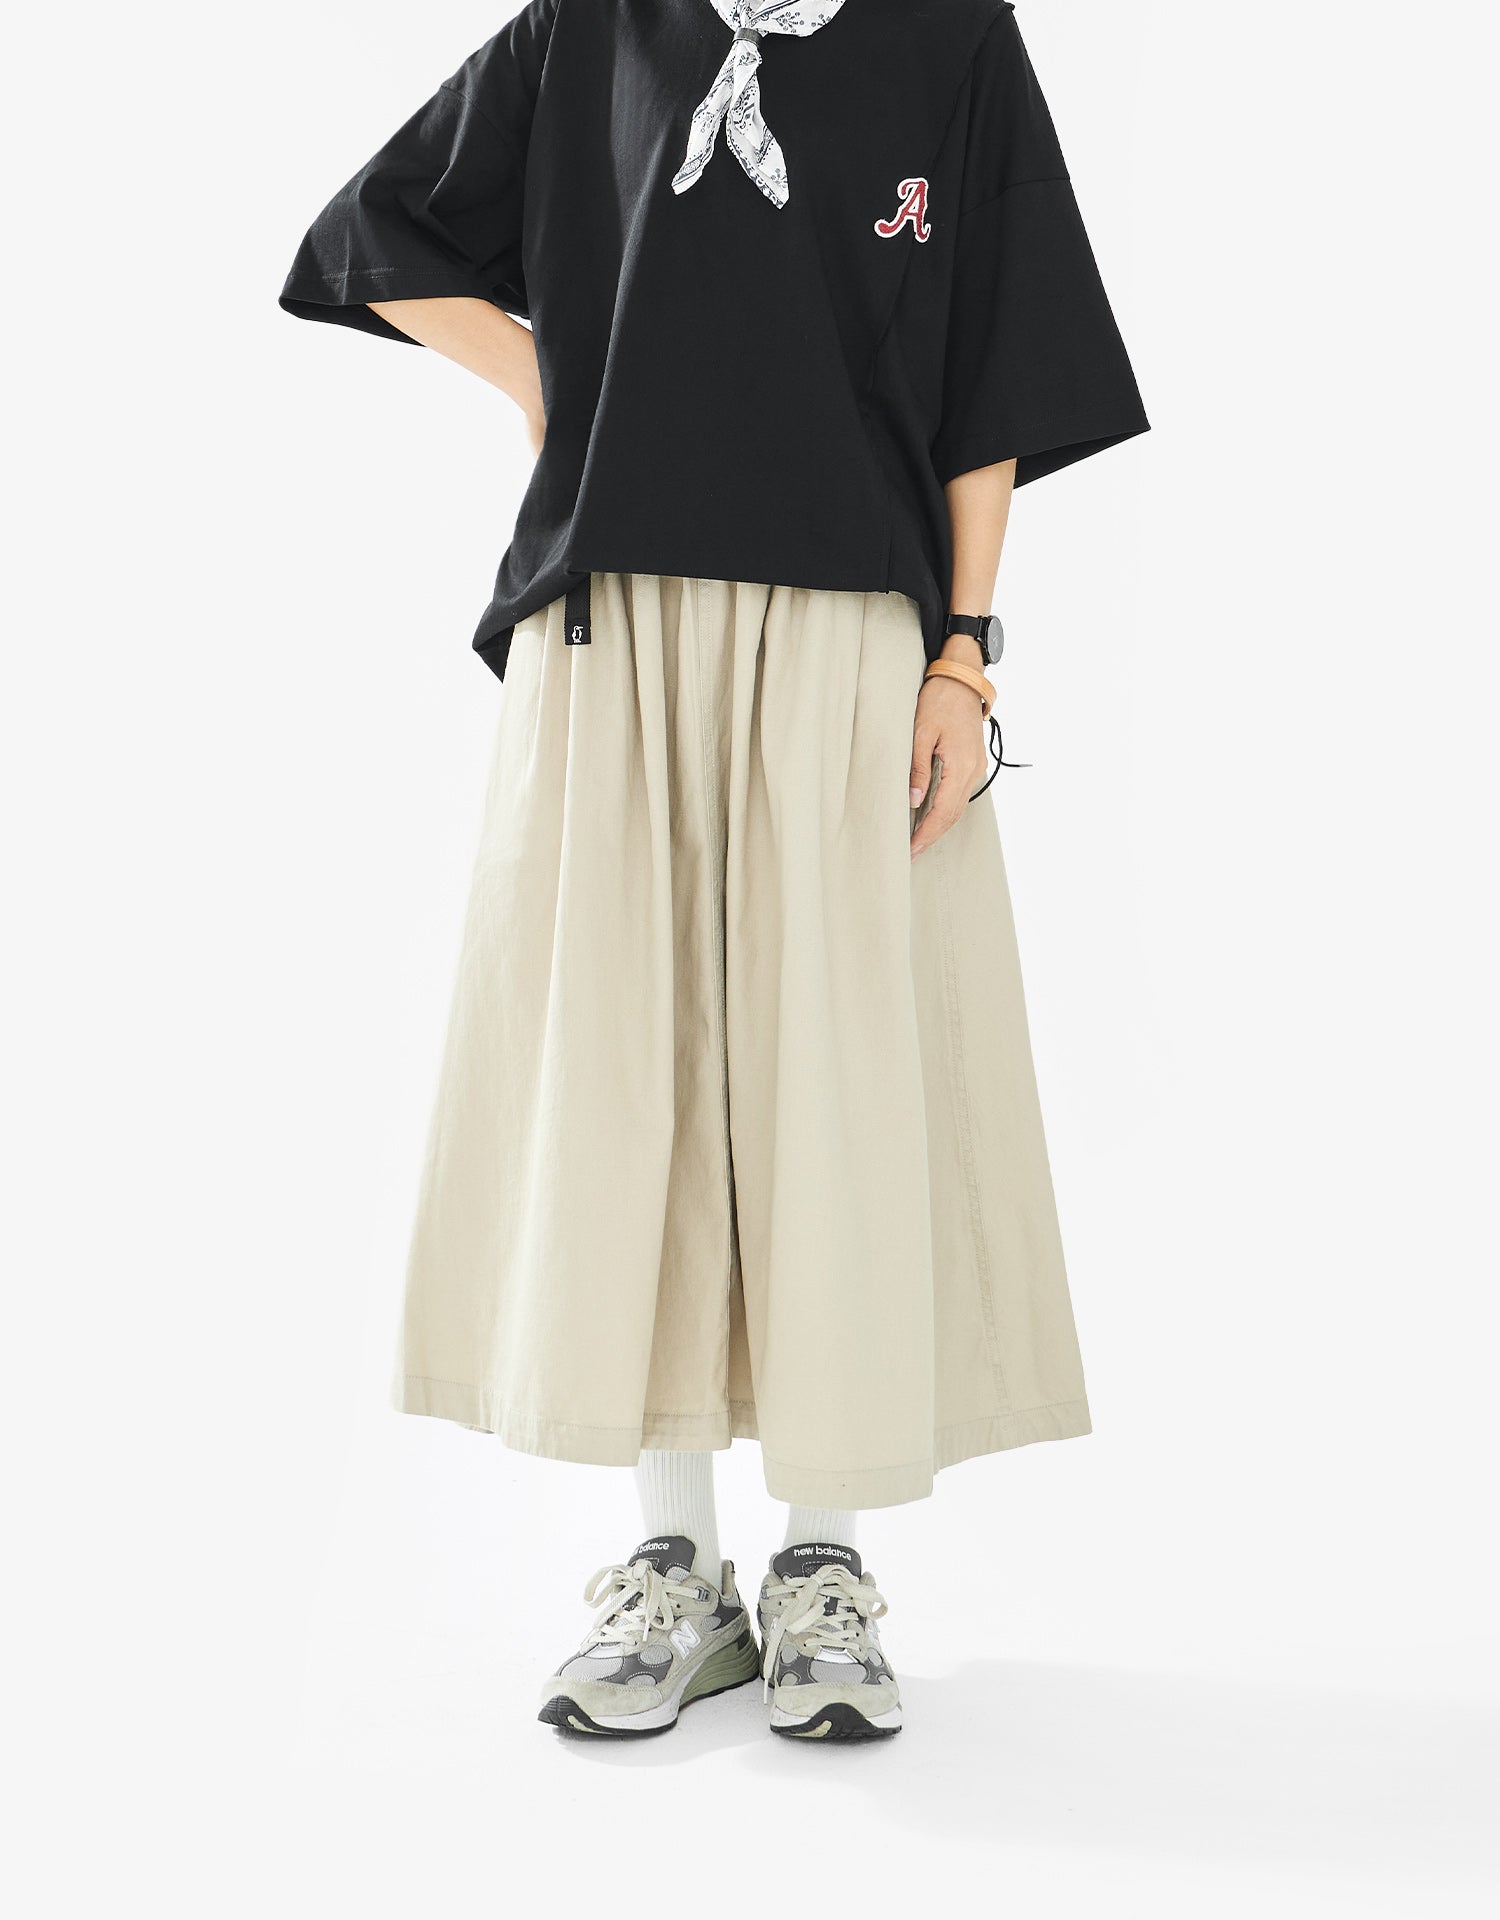 Chums Two Tuck Wide Skirt